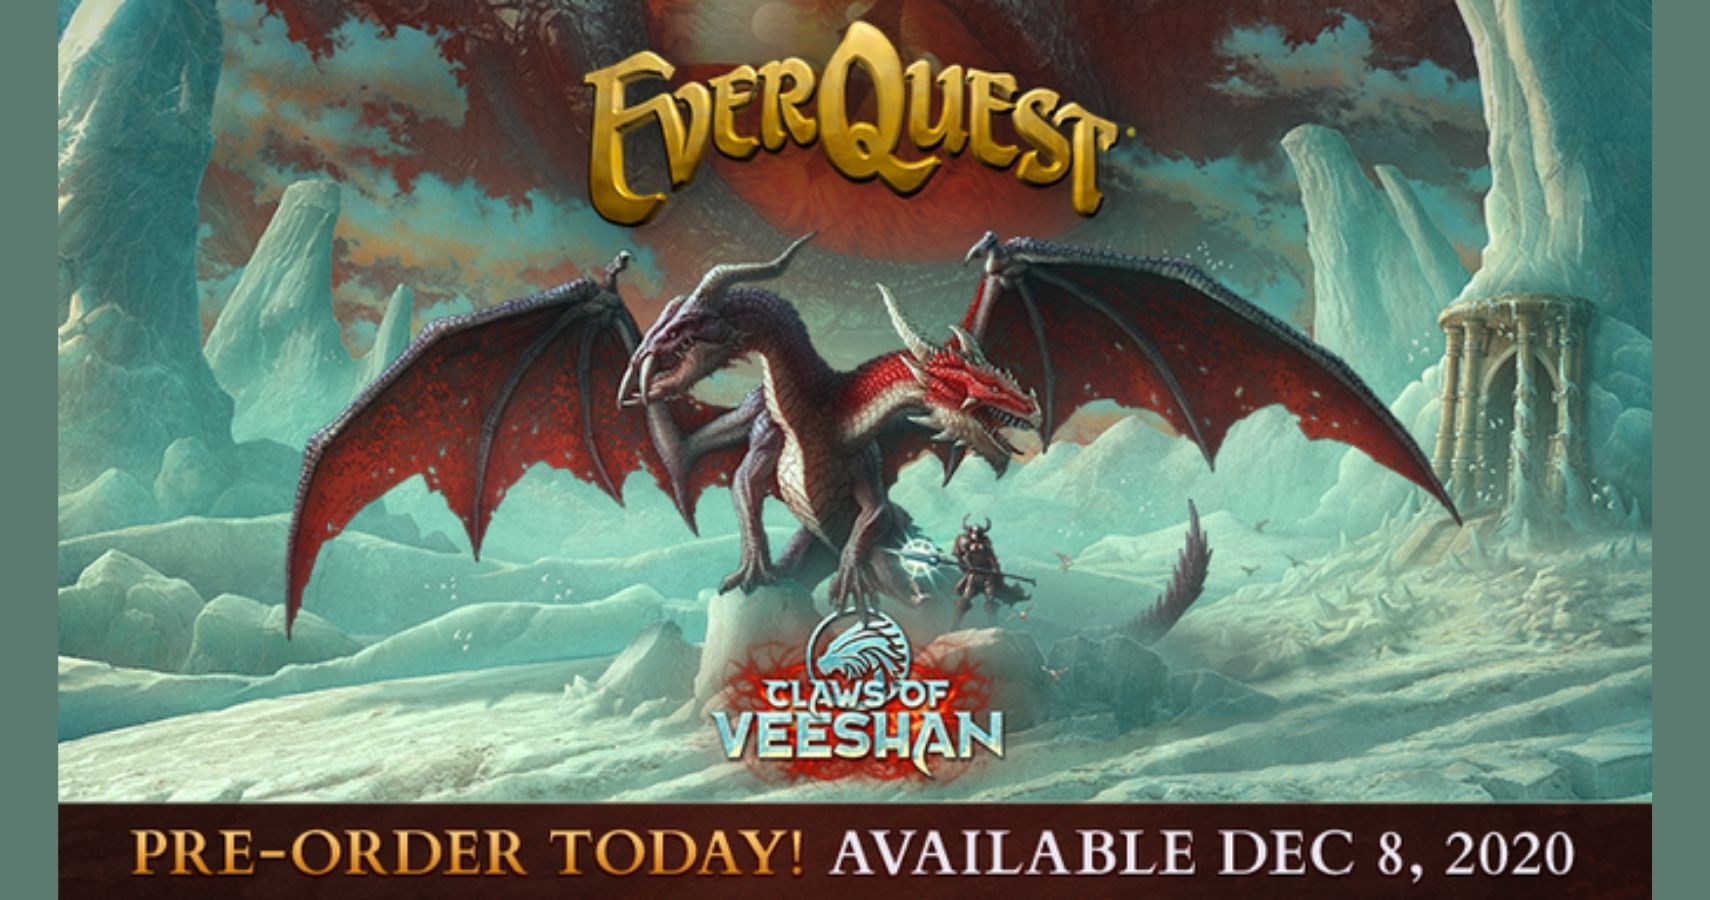 EverQuest Claws of Veeshan Expansion Pack feature image